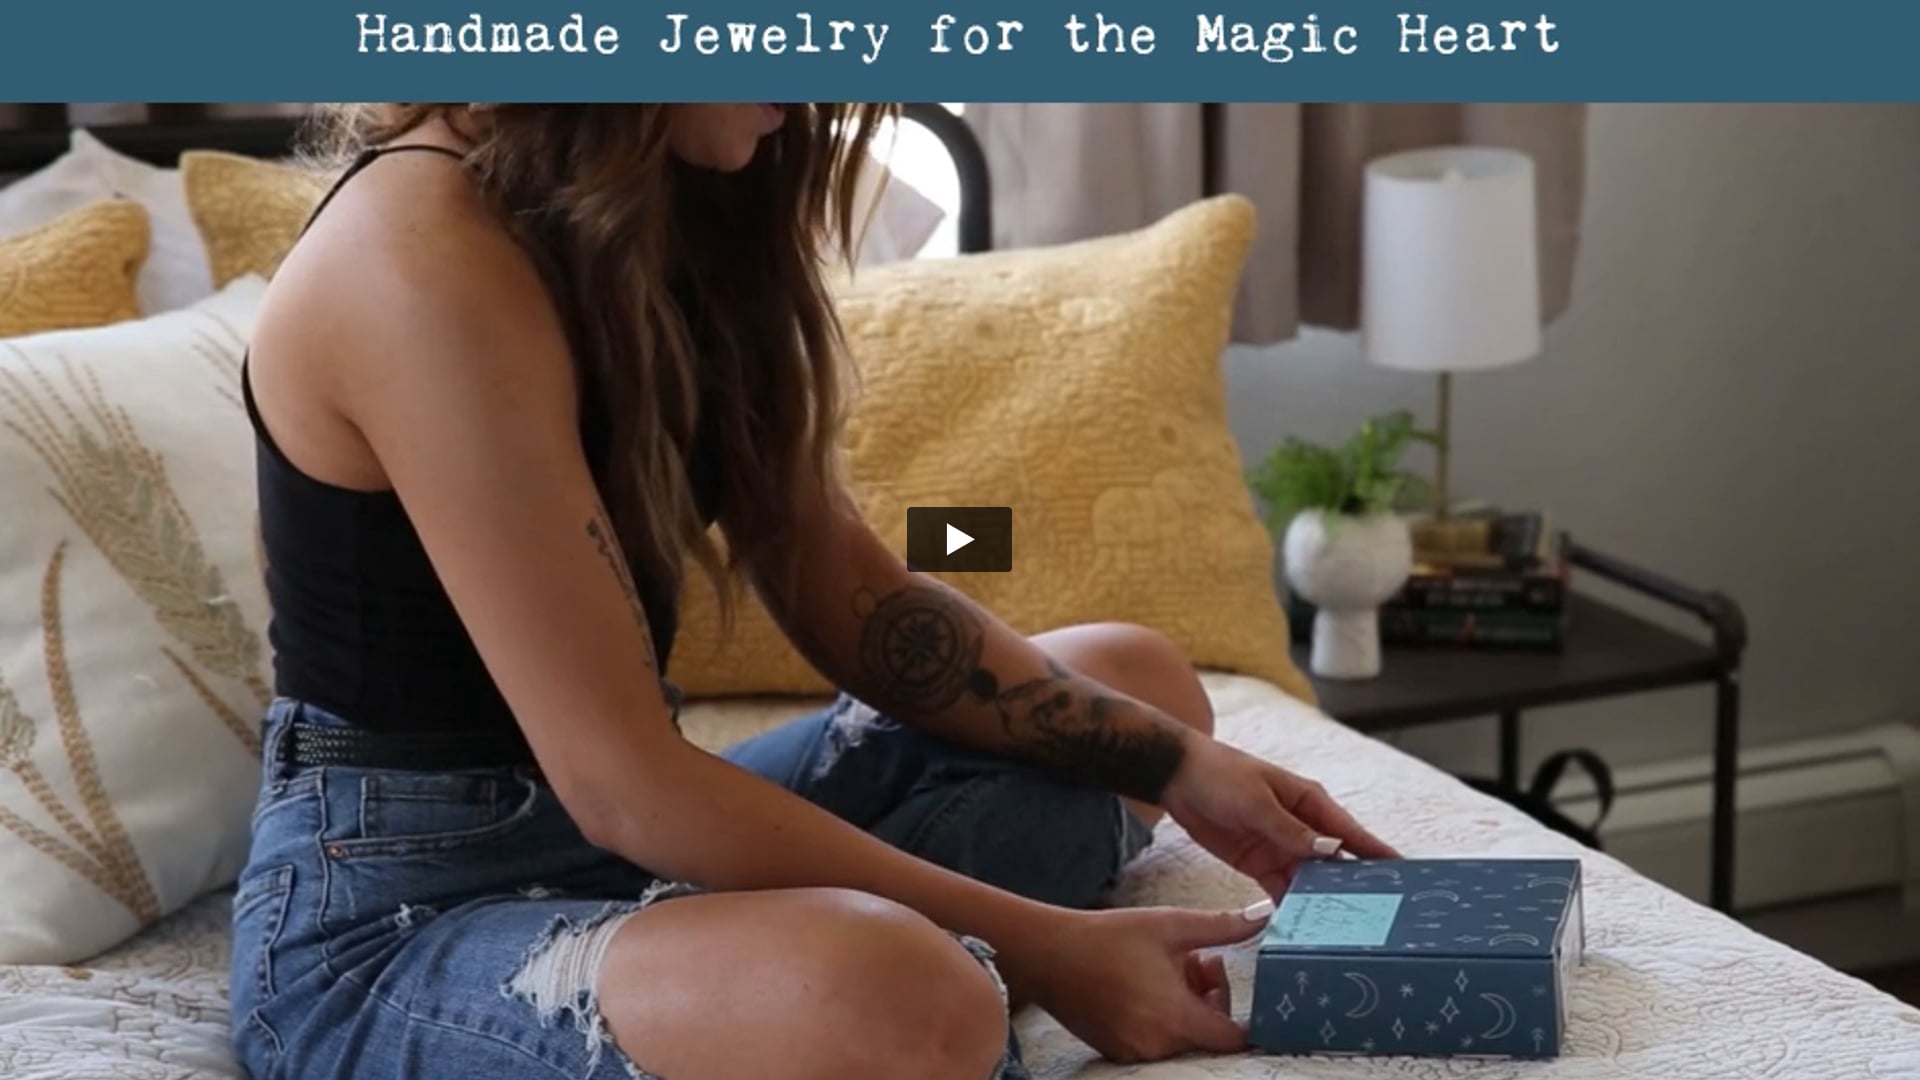 Video of woman opening up a jewelry subscription box.